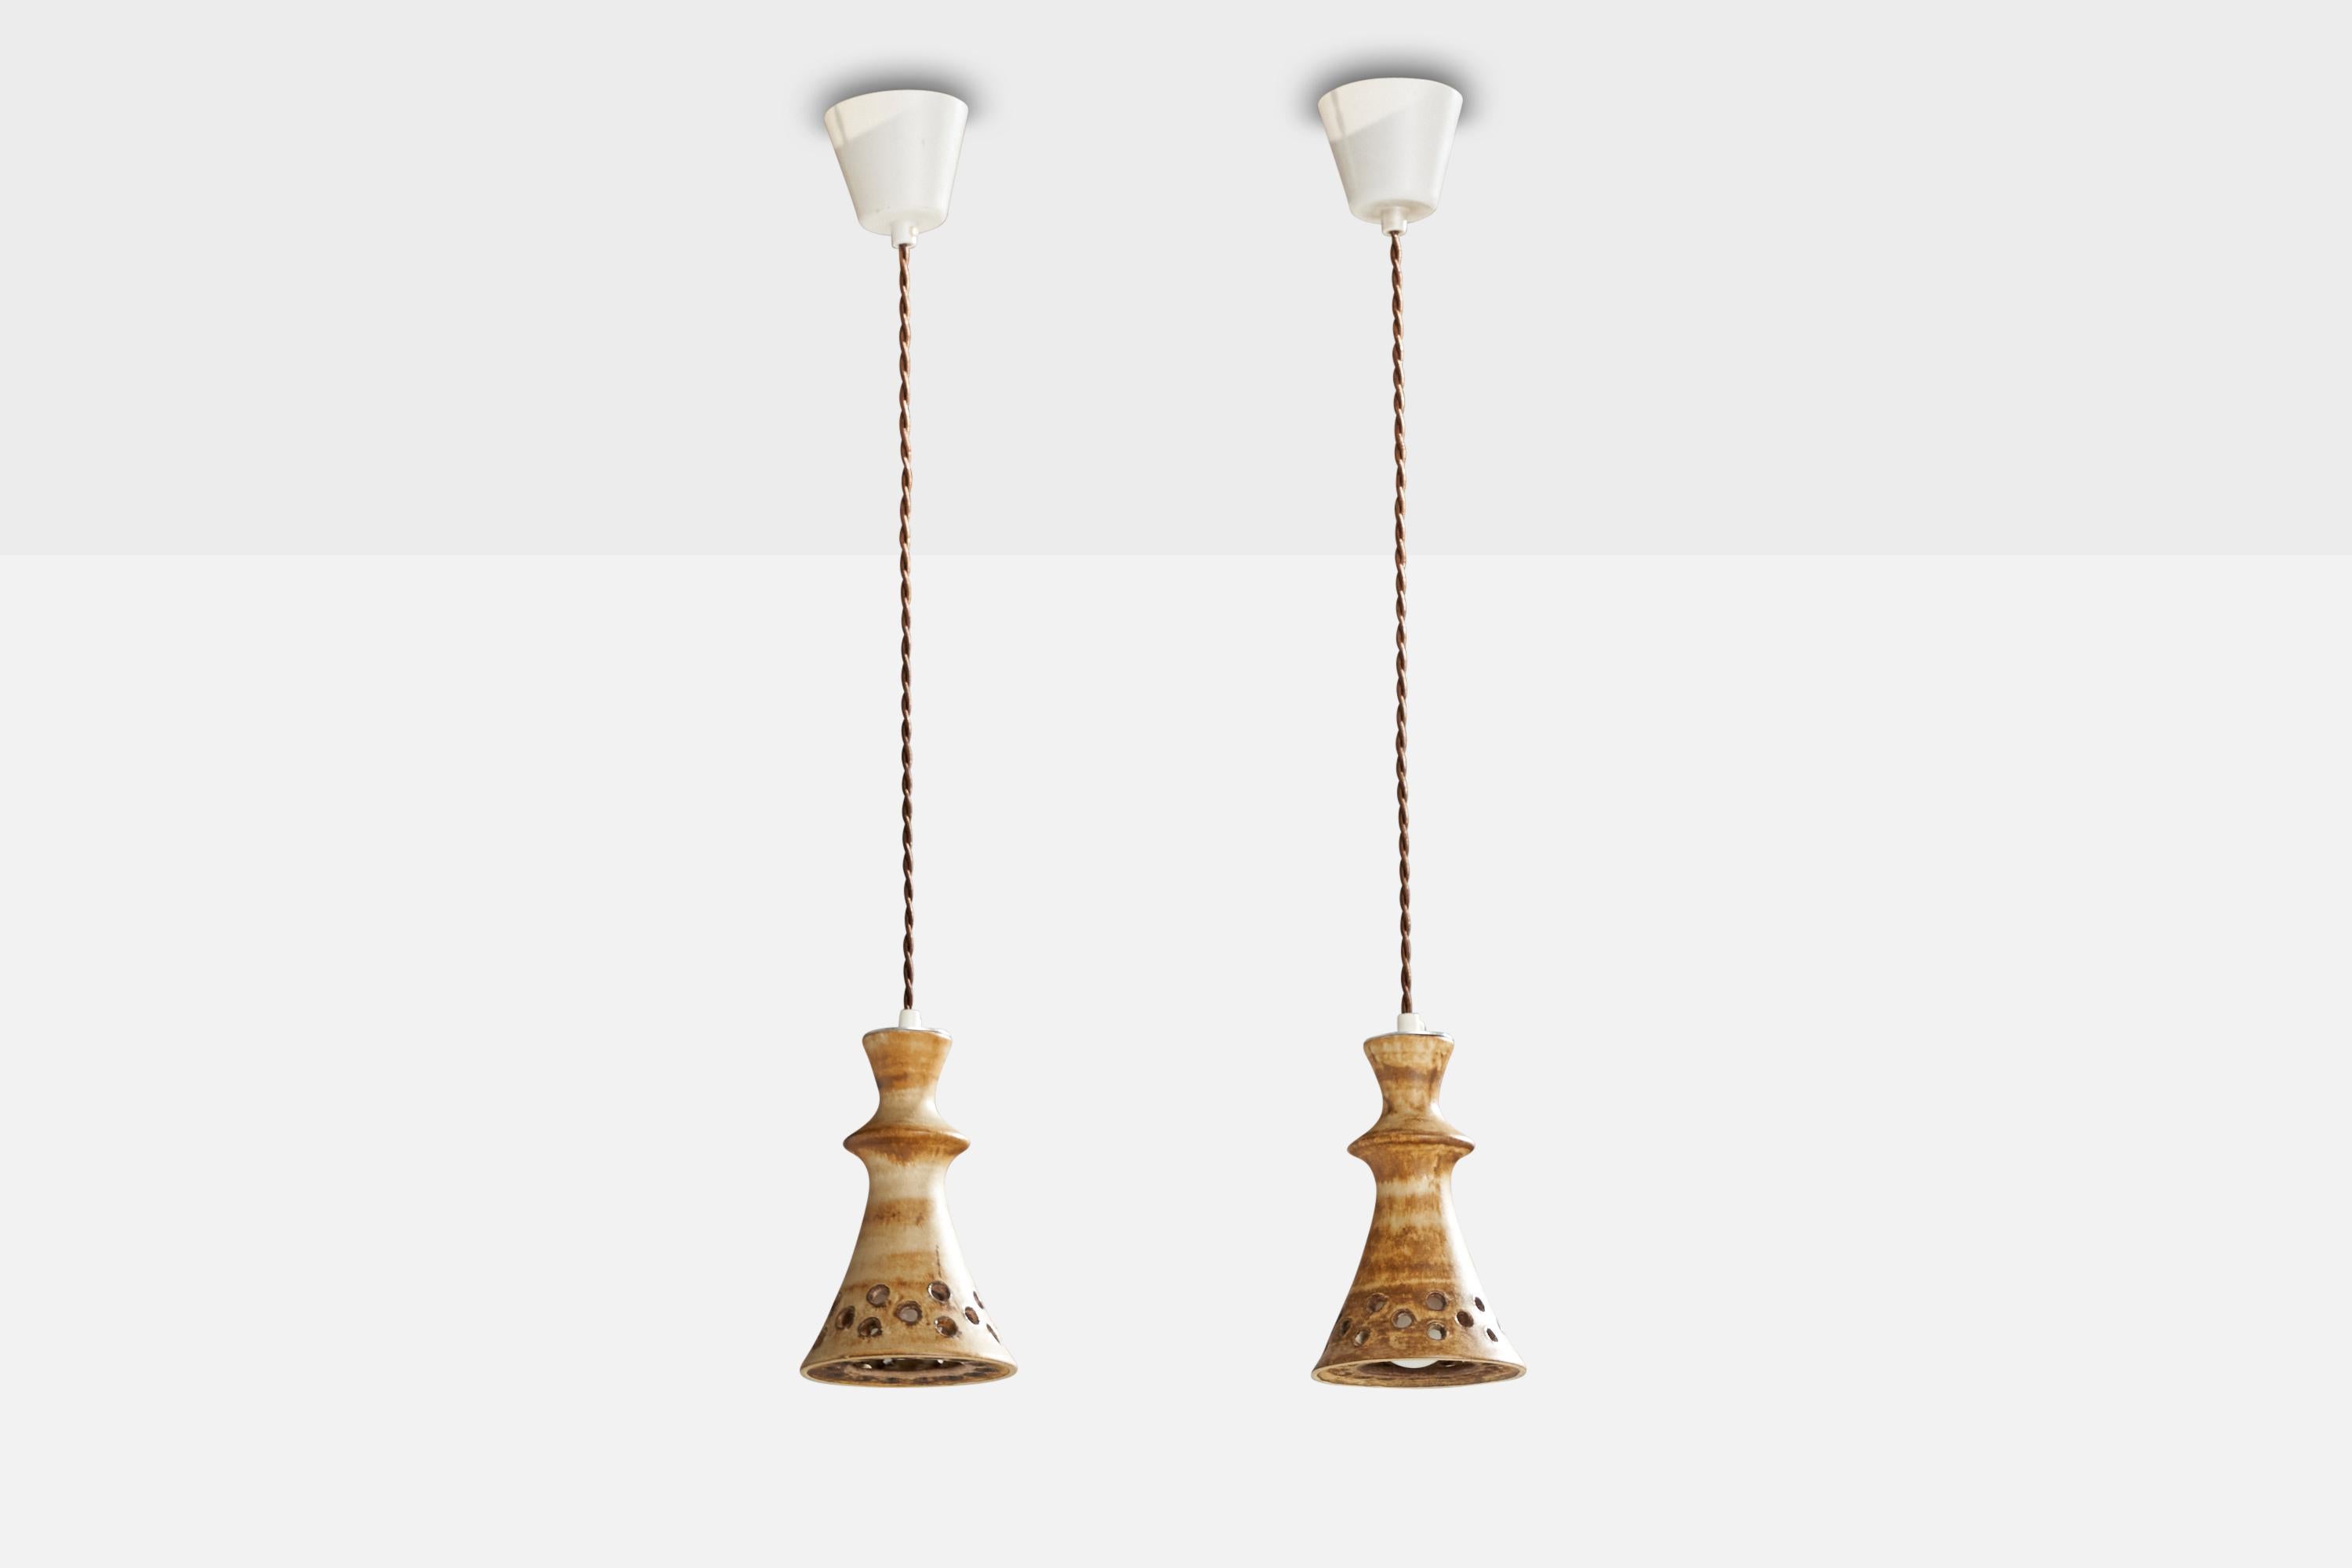 A pair of brown and beige-glazed stoneware pendant lights designed by Bruno Karlsson and produced by Ego Stengods, Sweden, 1960s.

Rewired.

Dimensions of canopy (inches): 3.00” H x 3.5” Diameter
Socket takes standard E-26 bulbs. 2 sockets.There is